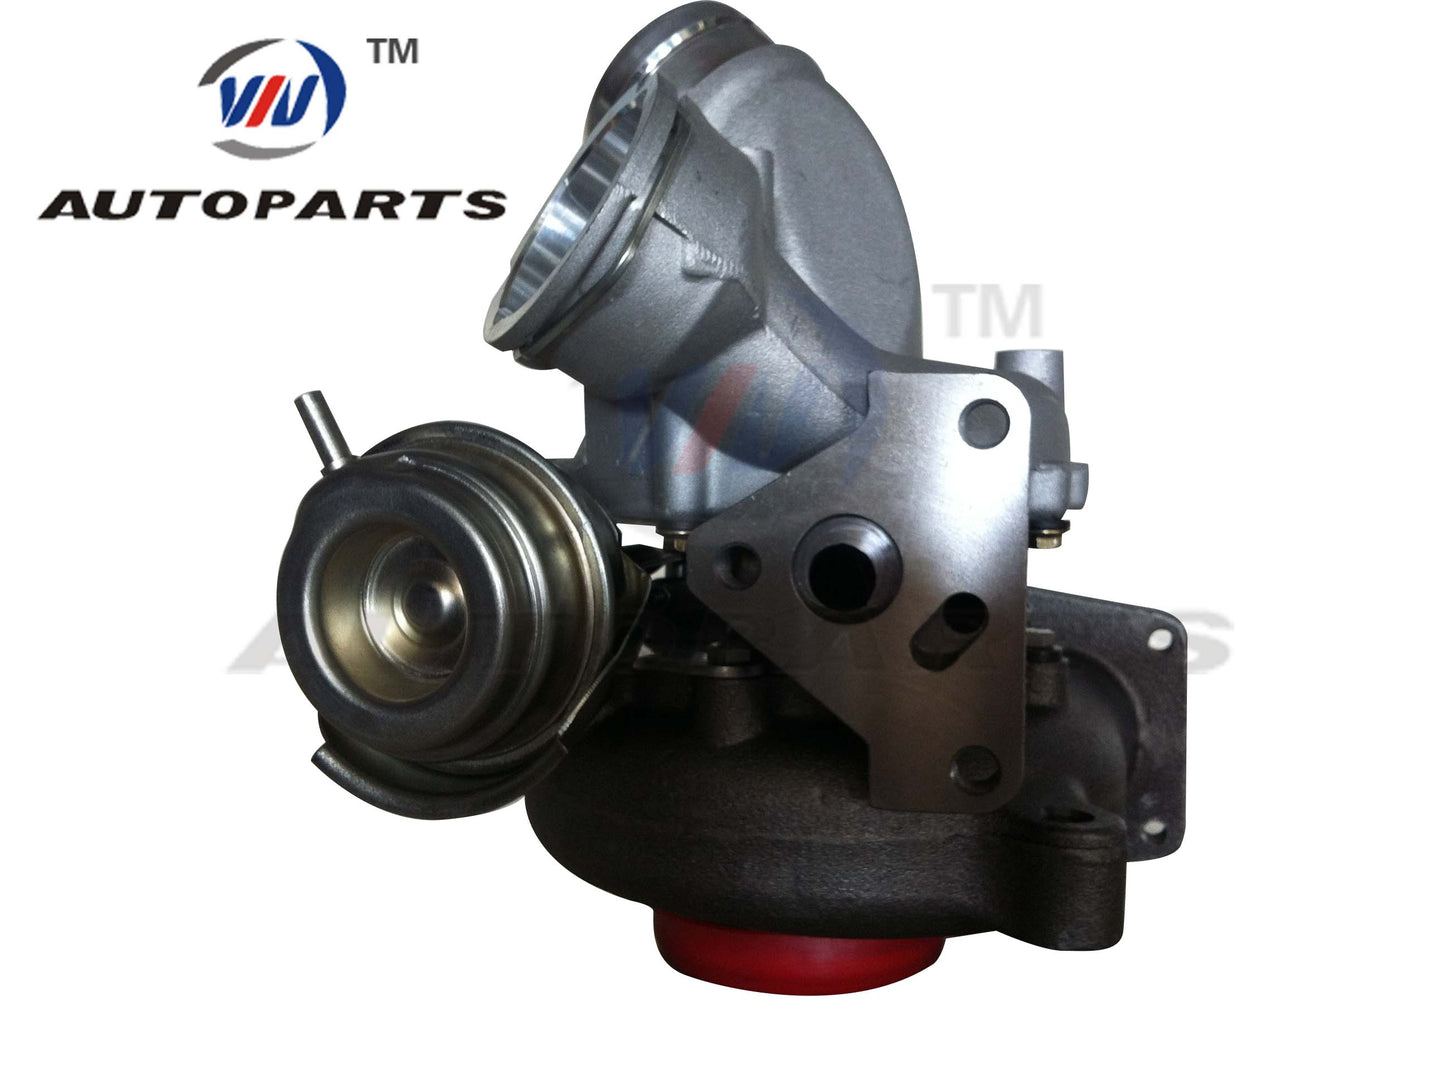 Turbocharger 716885-5004S for Volkswagen Touareg with 2.5L Diesel Engine